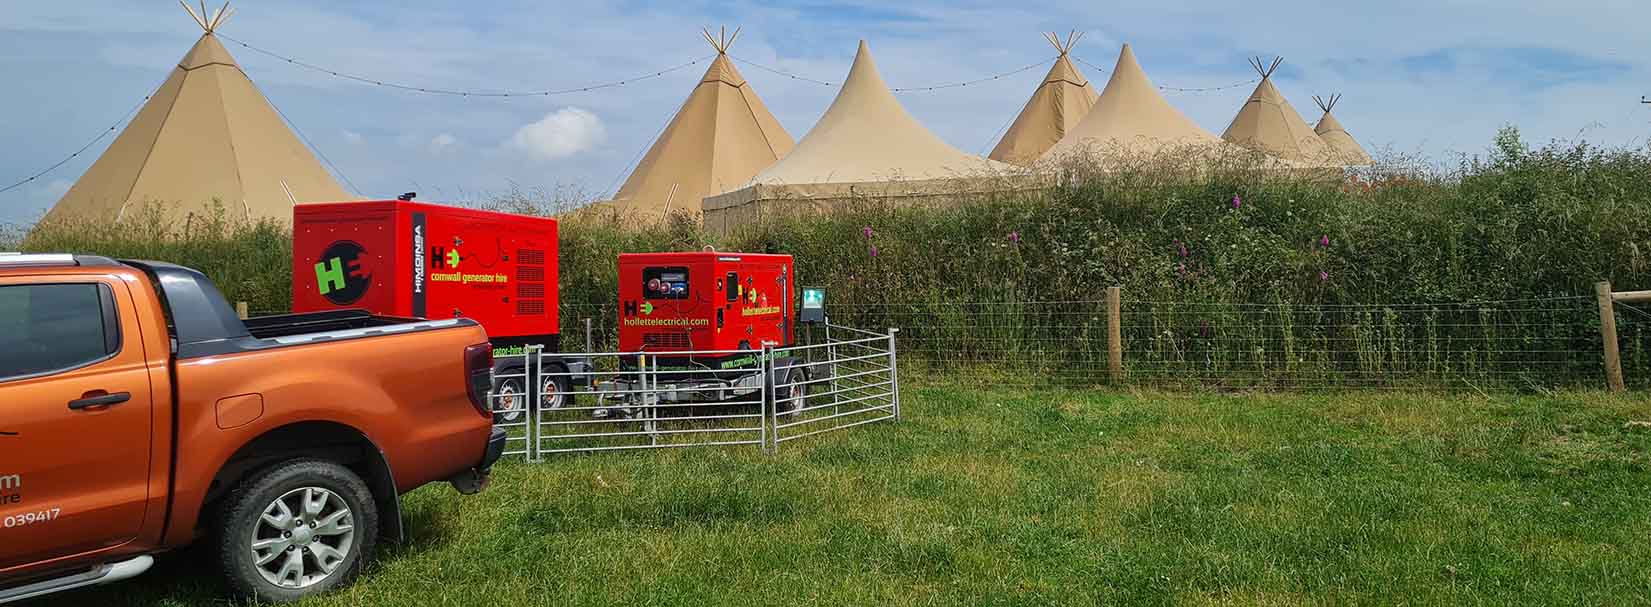 Generator hire for Tipi weddings